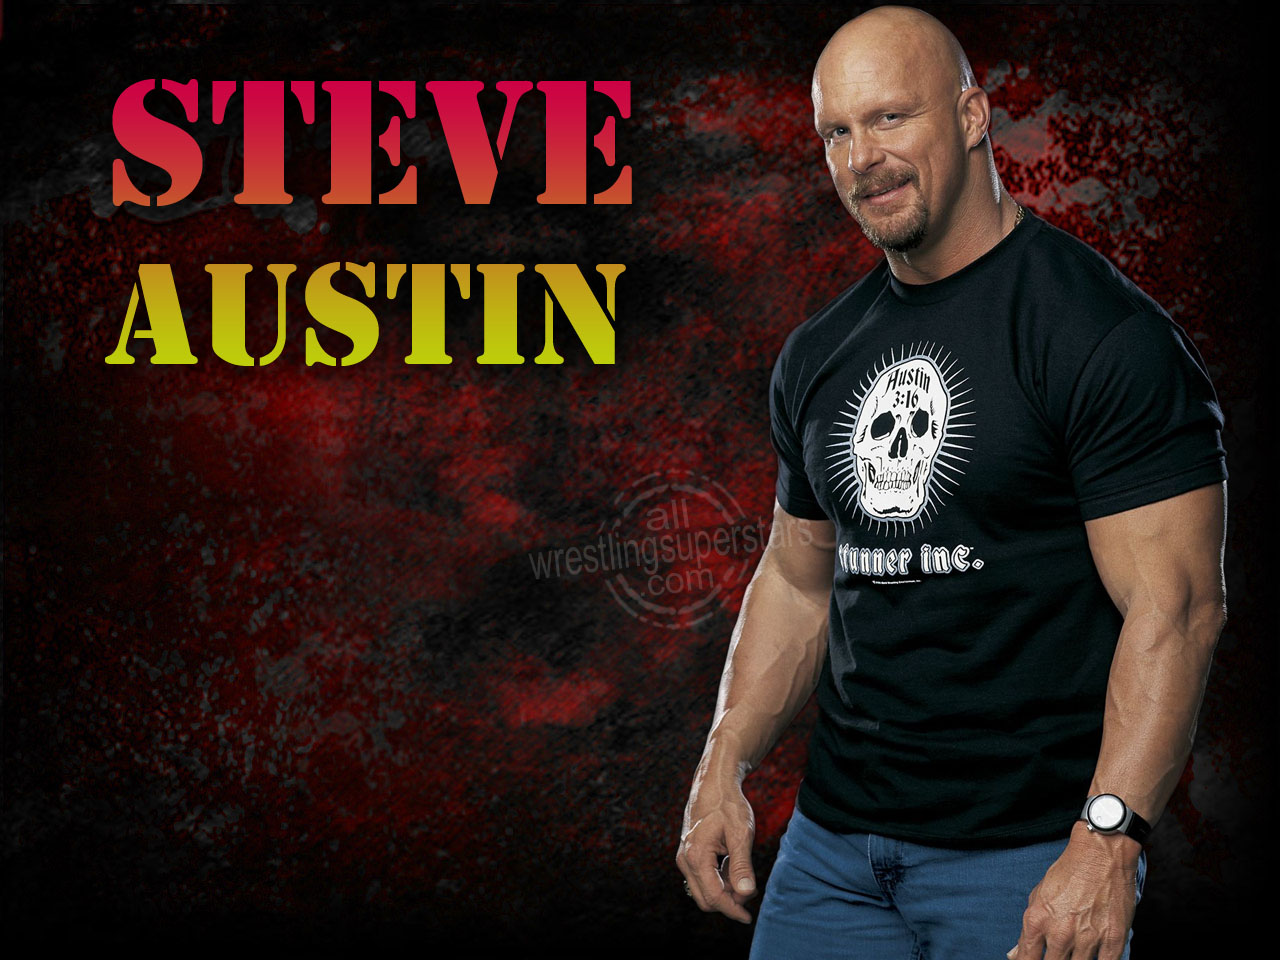 WWE WALLPAPERS Stone cold Stone cold wallpaper stone 1280x960